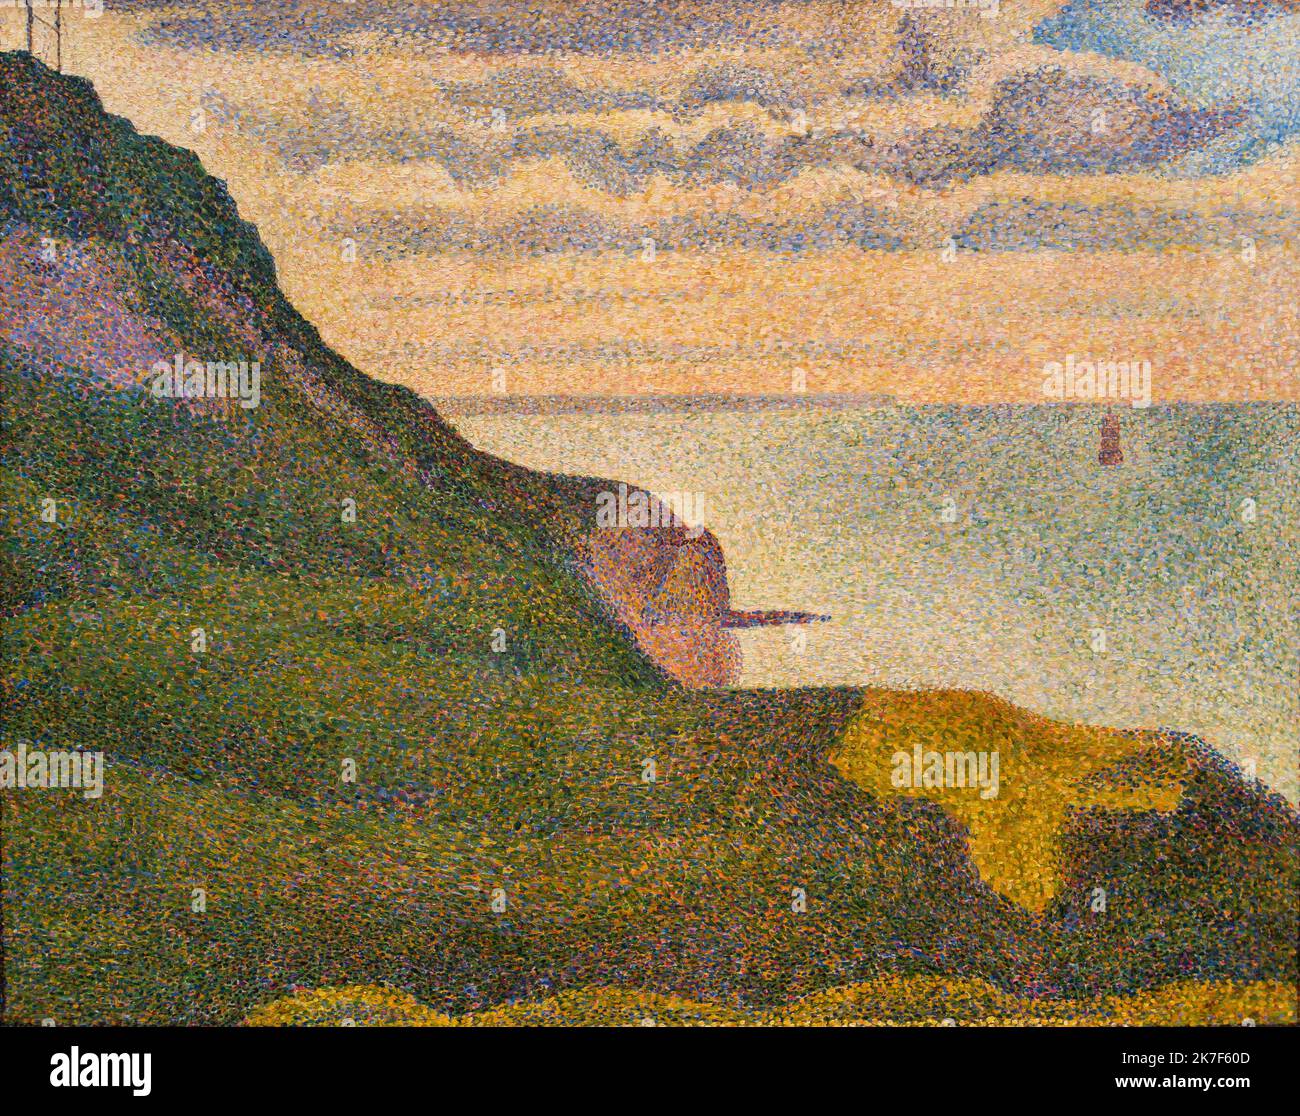 ©Active Museu/MAXPPP - ActiveMuseum 0001032.jpg / Paysage cotier pres de Port-en-Bessin, Normandie, 1888 - Georges Seurat - Seascape at Port-en-Bessin, Normandy 1888 - / Georges Seurat / Peinture Active Museum / Le Pictorium Cliff ,Cloudy sky ,greenery ,Hill ,Horizontal ,Impressionism ,Landscape ,Light ,Ocean ,Pointillism ,Relief (geography) ,Sea ,Calvados (french department) ,Europe ,France ,Lower Normandy ,Normandy ,Port-en-Bessin-Huppain ,Western Europe ,19th century ,Georges Seurat ,Painting ,  Stock Photo